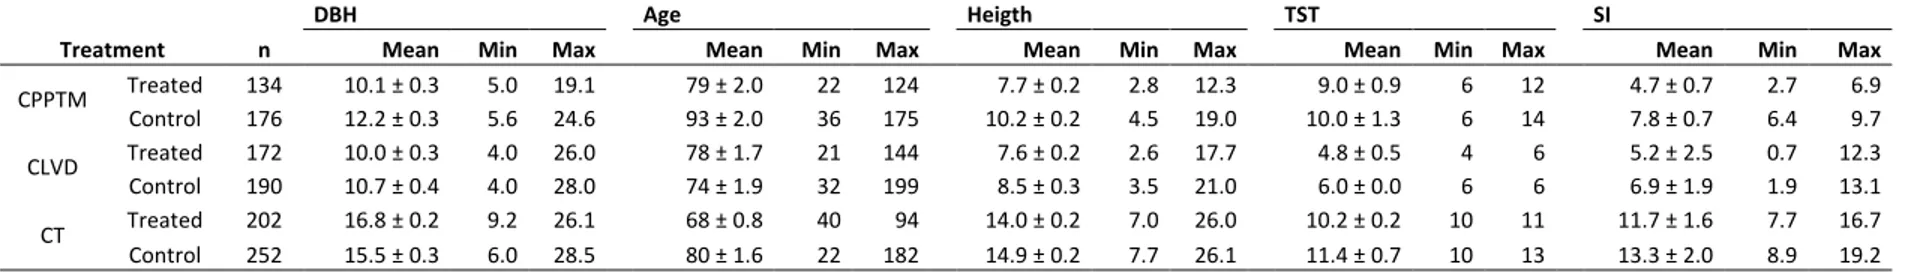 Table  1.2.  Mean  ±  standard  error,  minimum  and  maximum  diameter  at  1.3  m  (DBH),  age  and  height,  with  the  time  since  treatment (TST) and site index (SI), for n trees in each of the p treated and control plots within the three partial cut